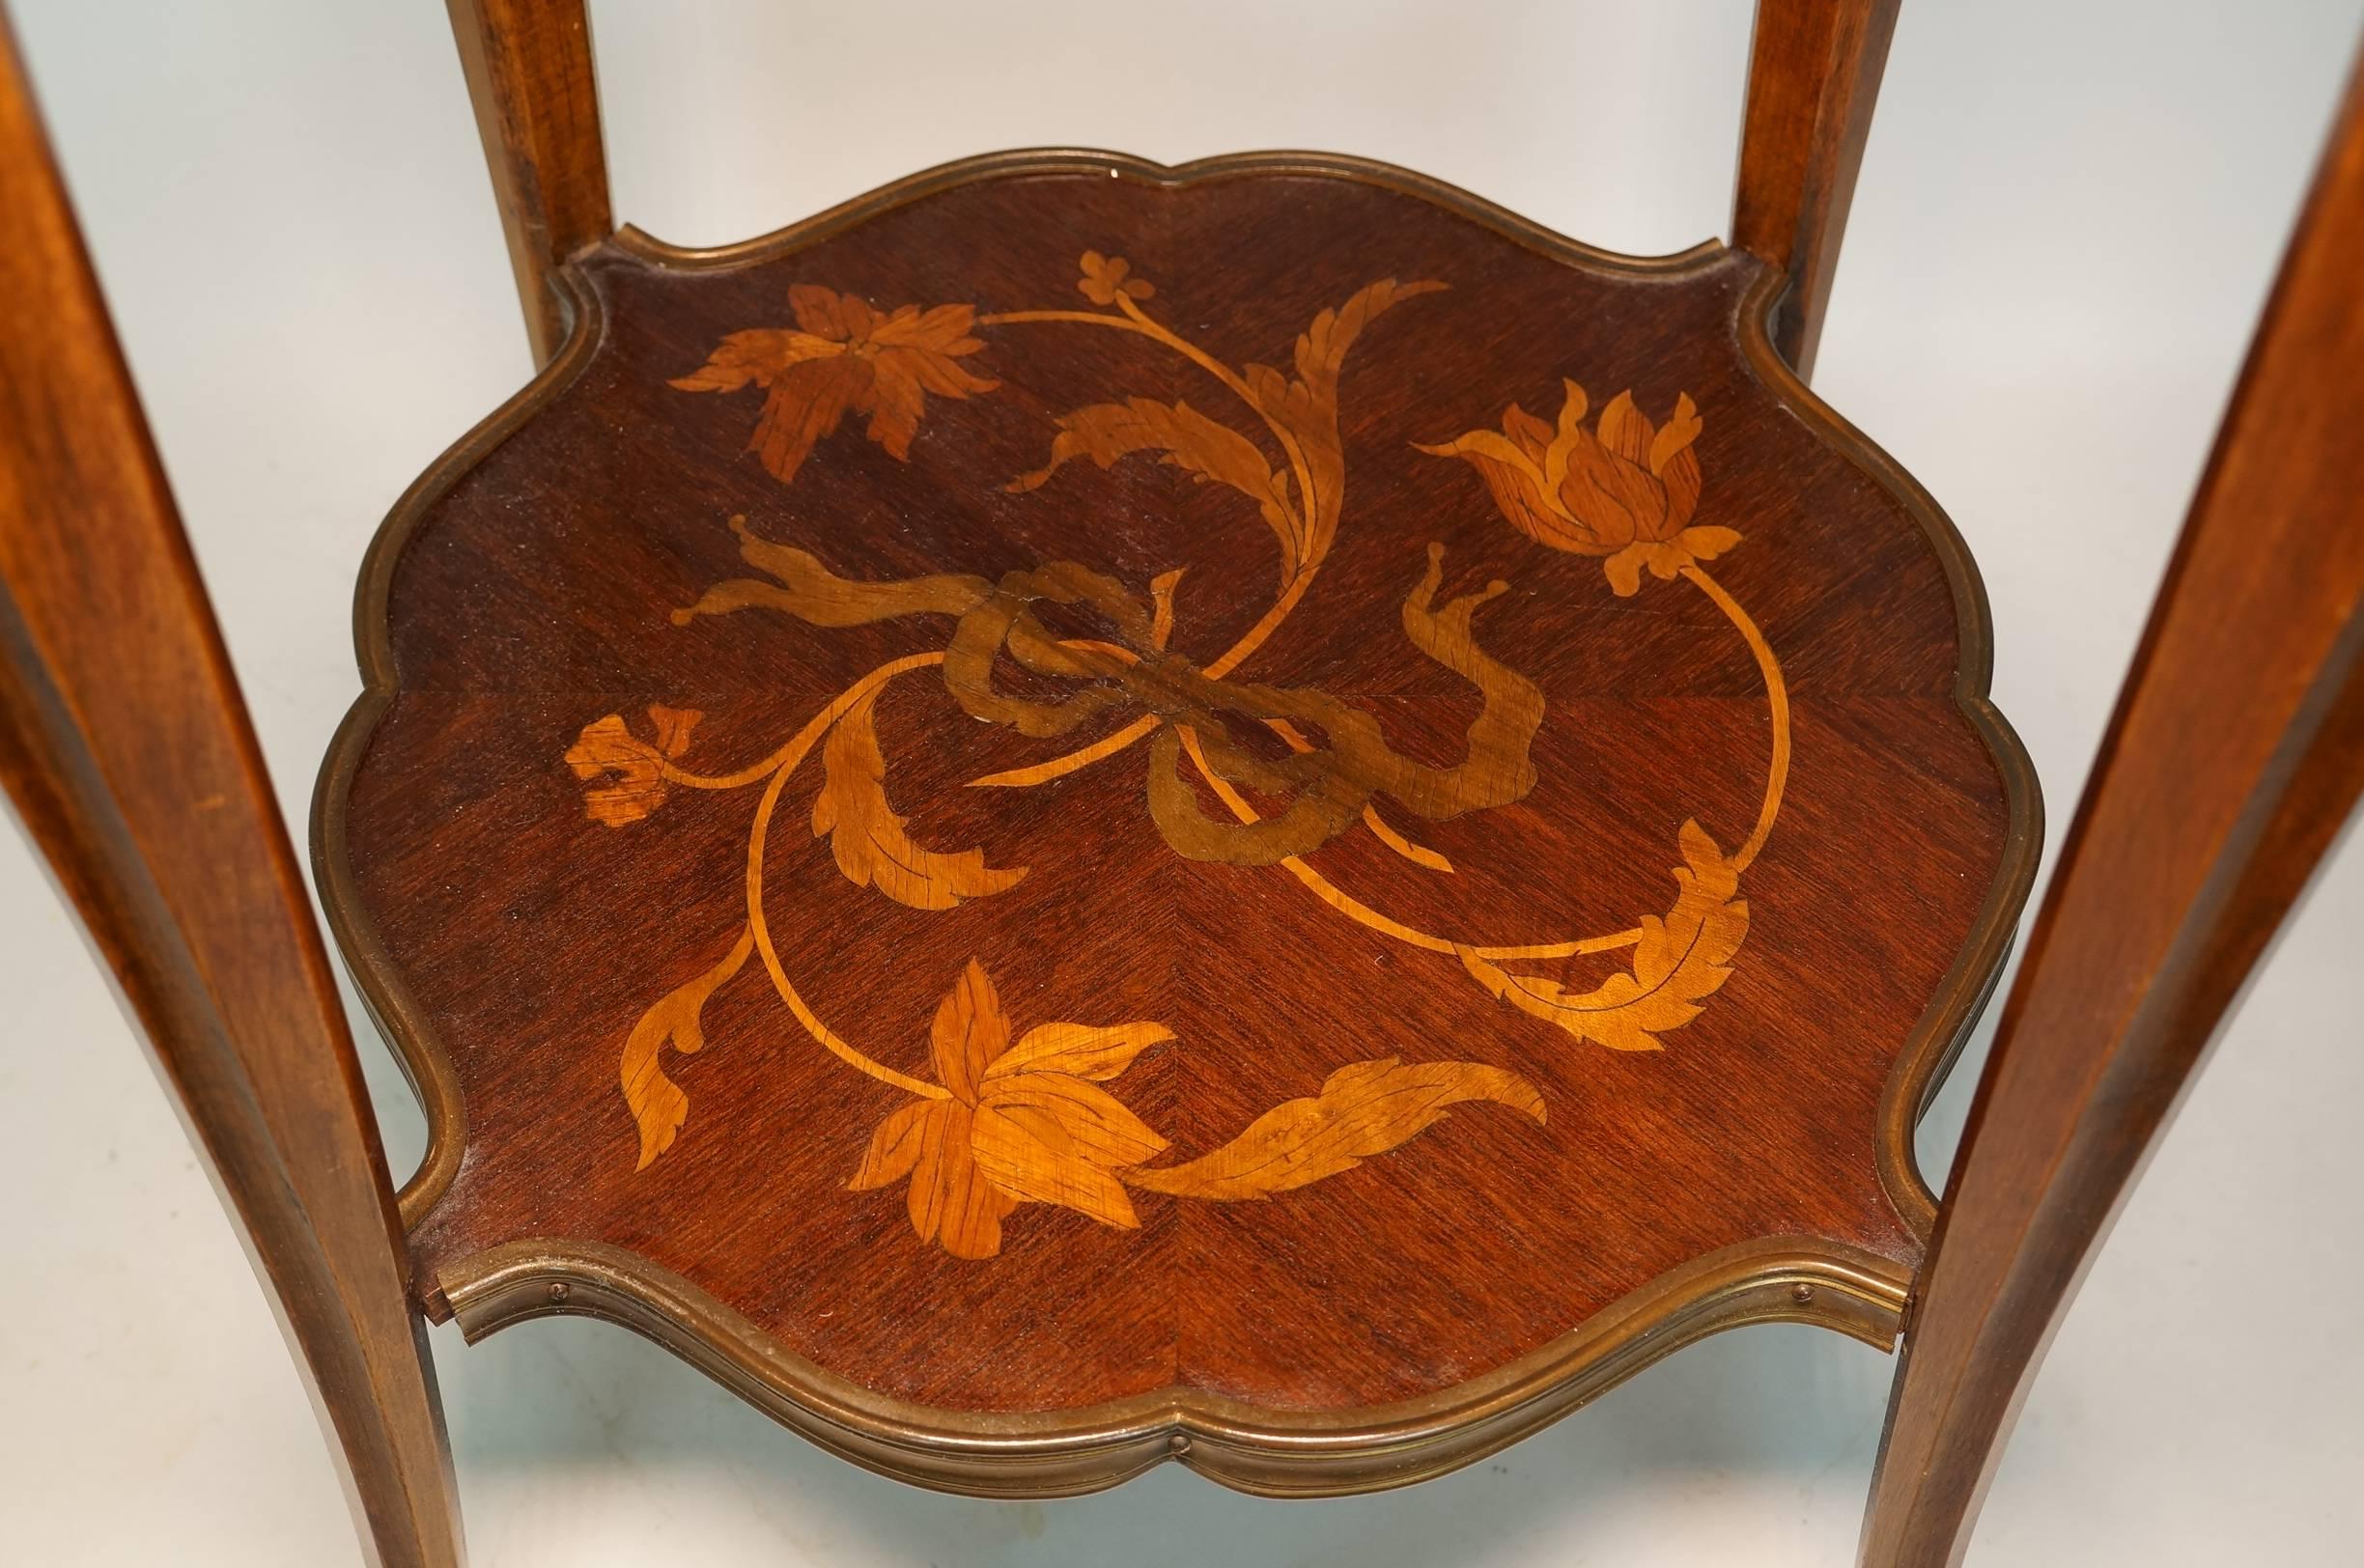  Pair of French  Louis XV style bronze mounted   Marquetry Inlaid Side Tables 2